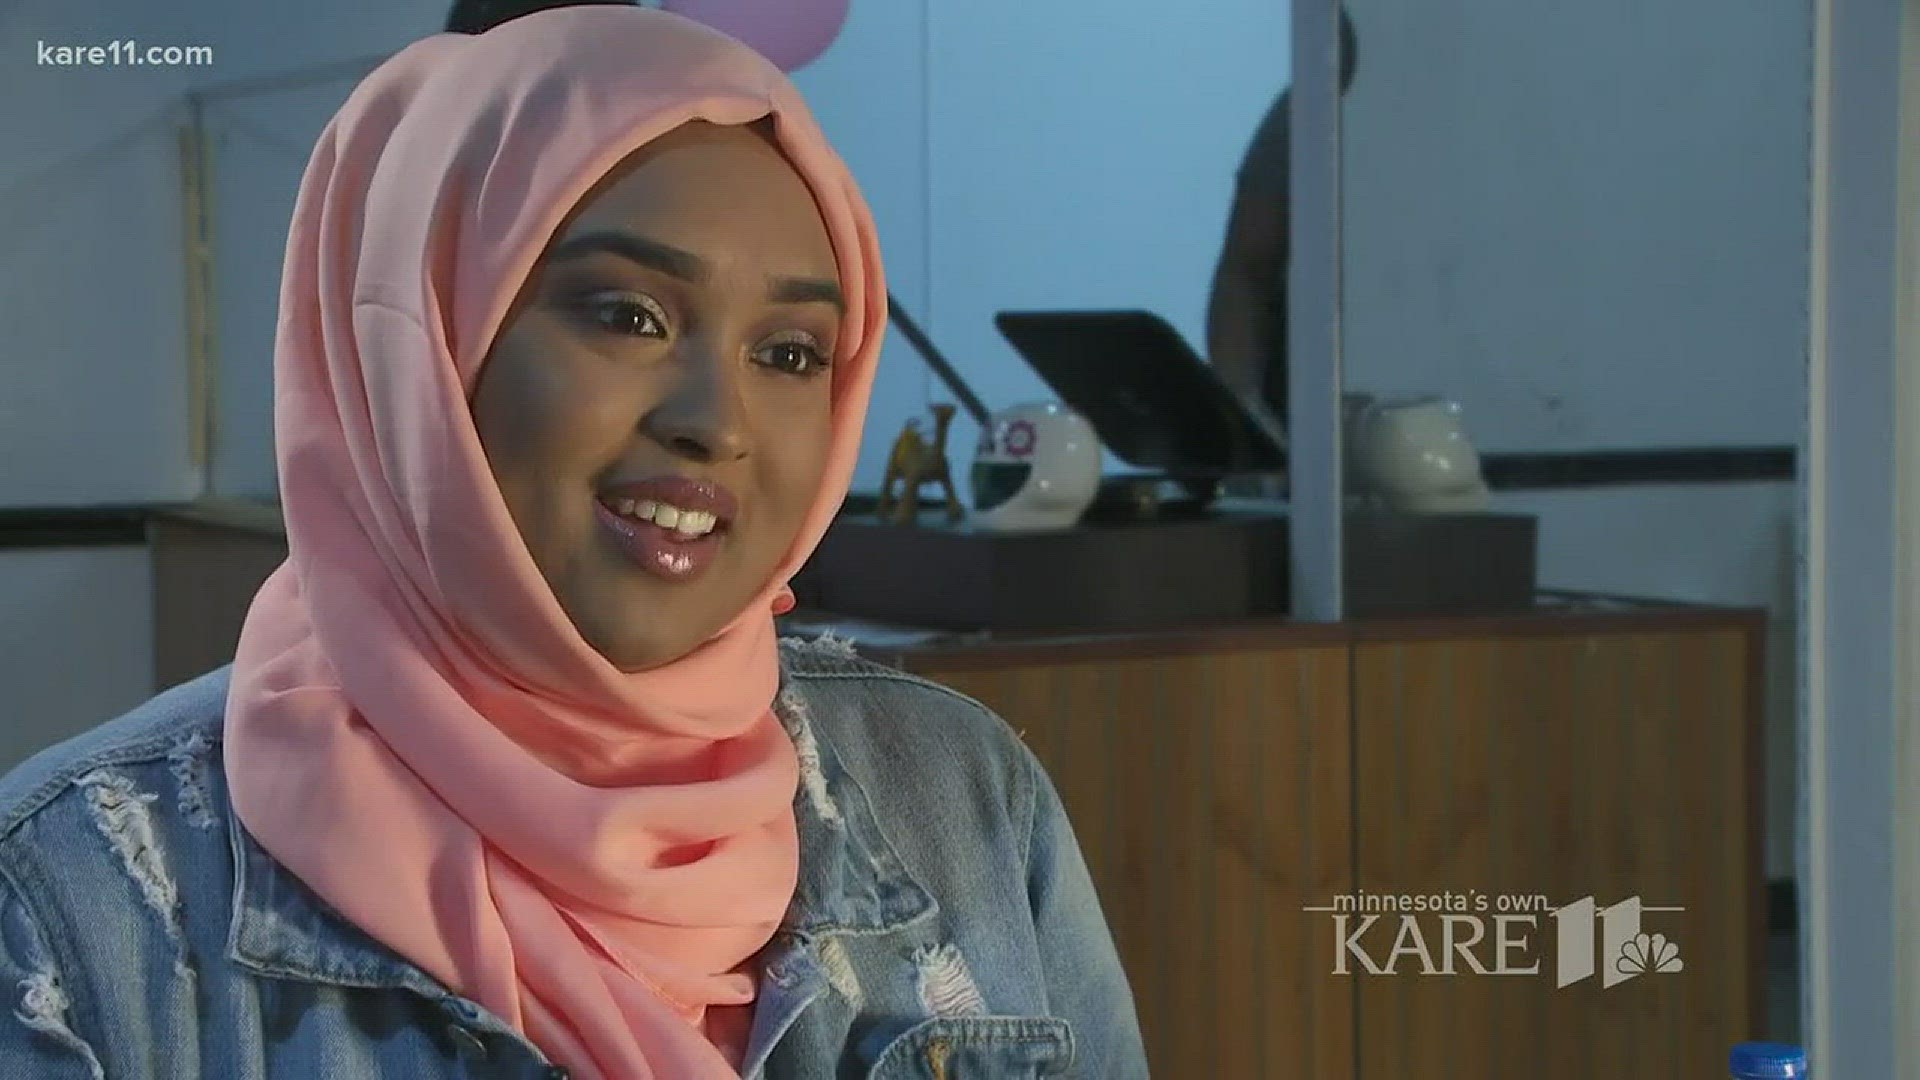 Nearly two weeks after a terrorist attack killed more than 300 people in Somalia, several Minneapolis businesses are coming together to raise money to help the survivors. http://kare11.tv/2yQCvmy